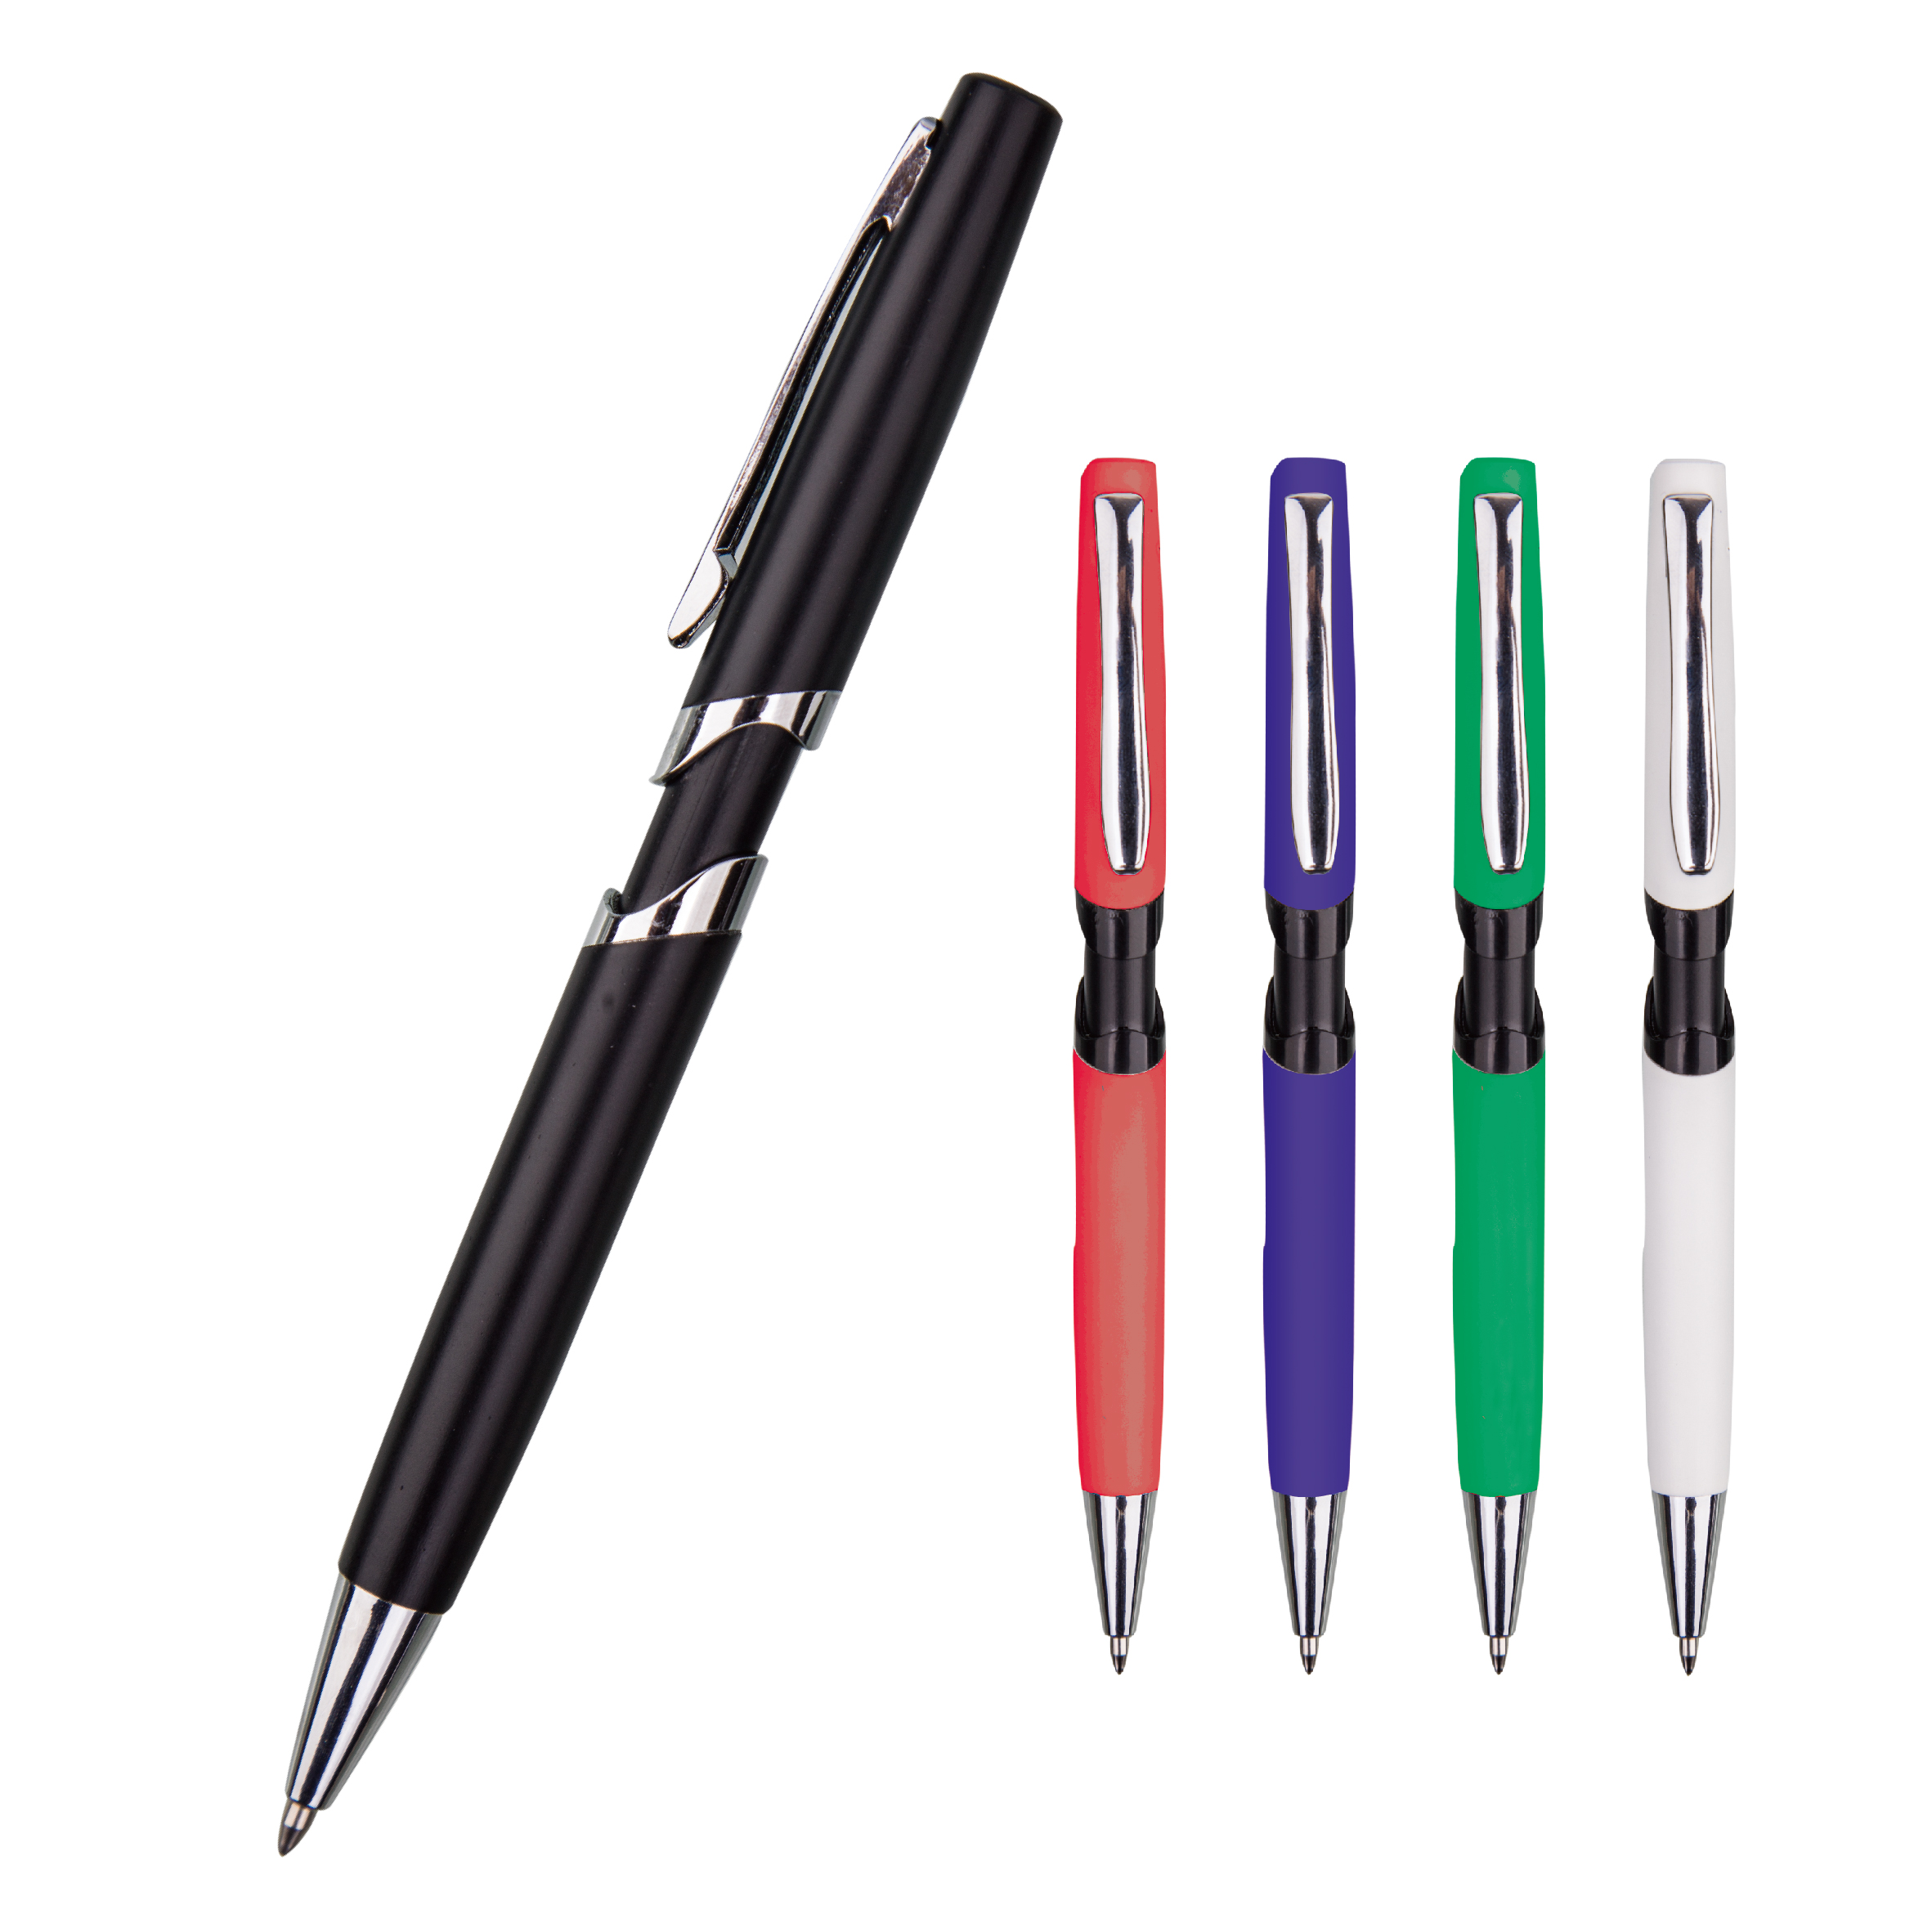 0.7mm/1.0mm Retractable Ball Metal Pen with Metal Clip High Quality